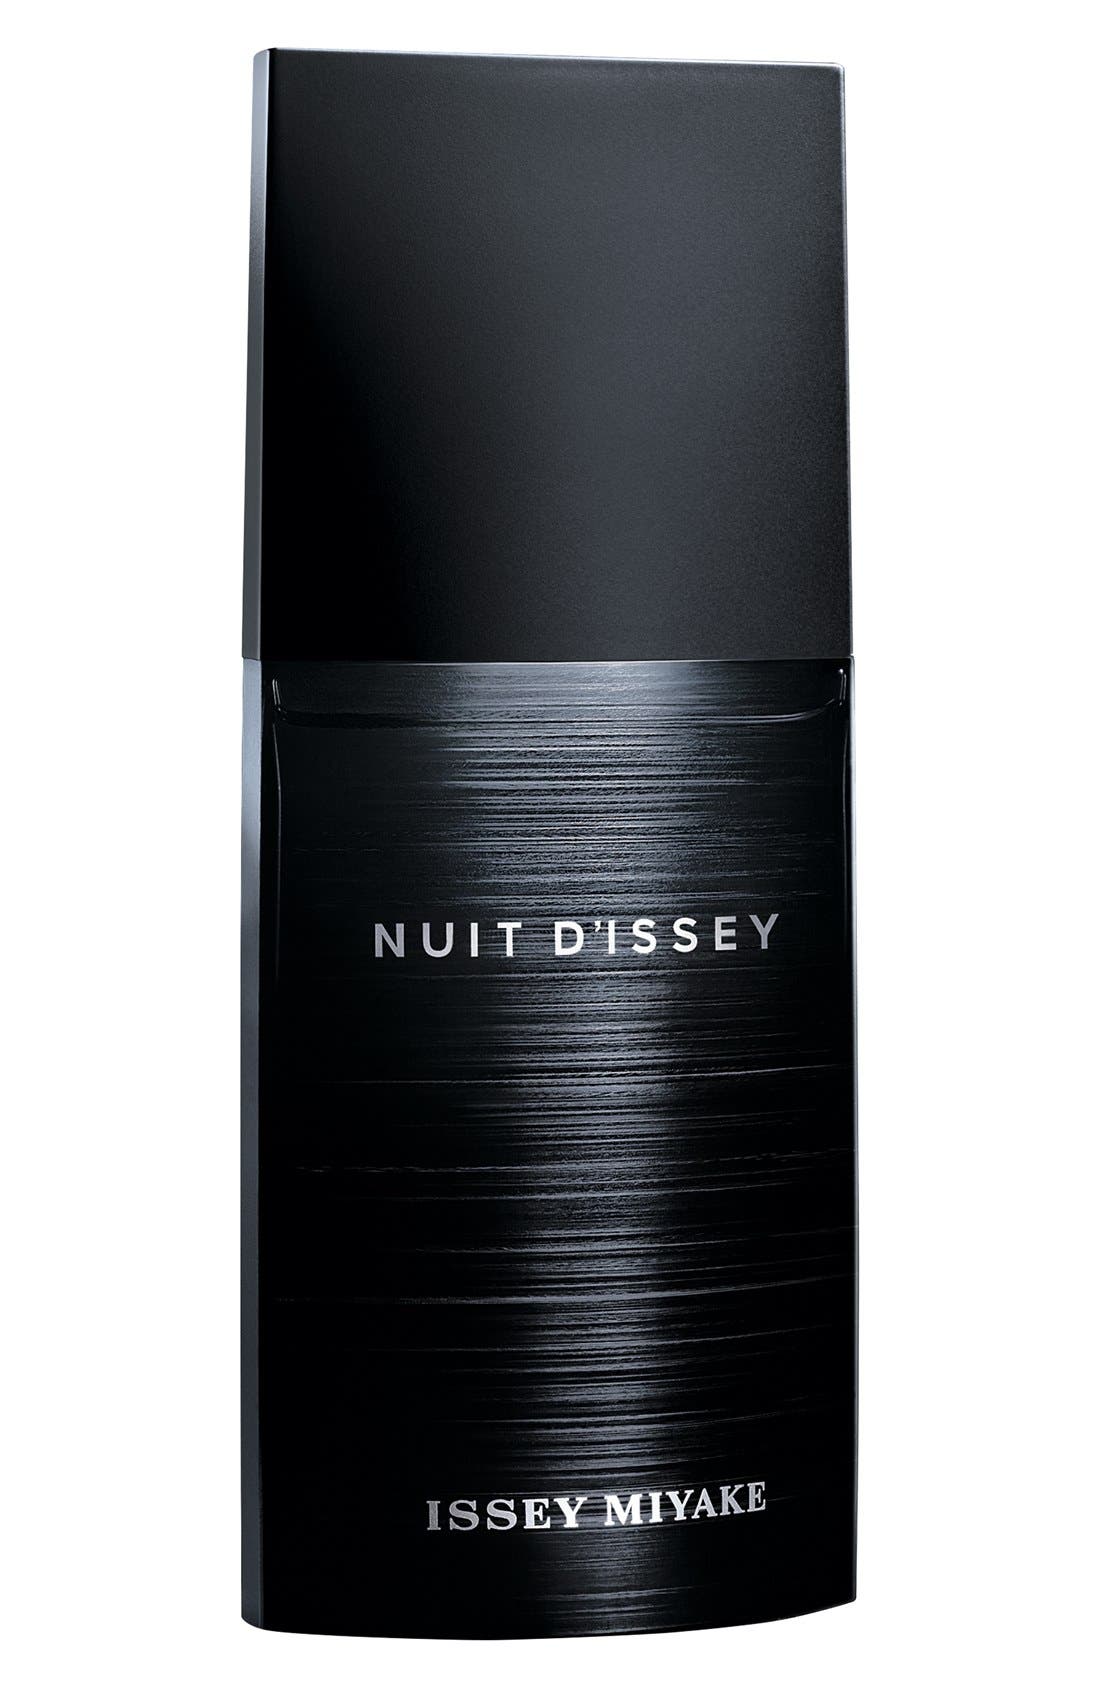 Issey Miyake 'Nuit d'Issey' Eau de Toilette at Nordstrom, Size 4.2 Oz